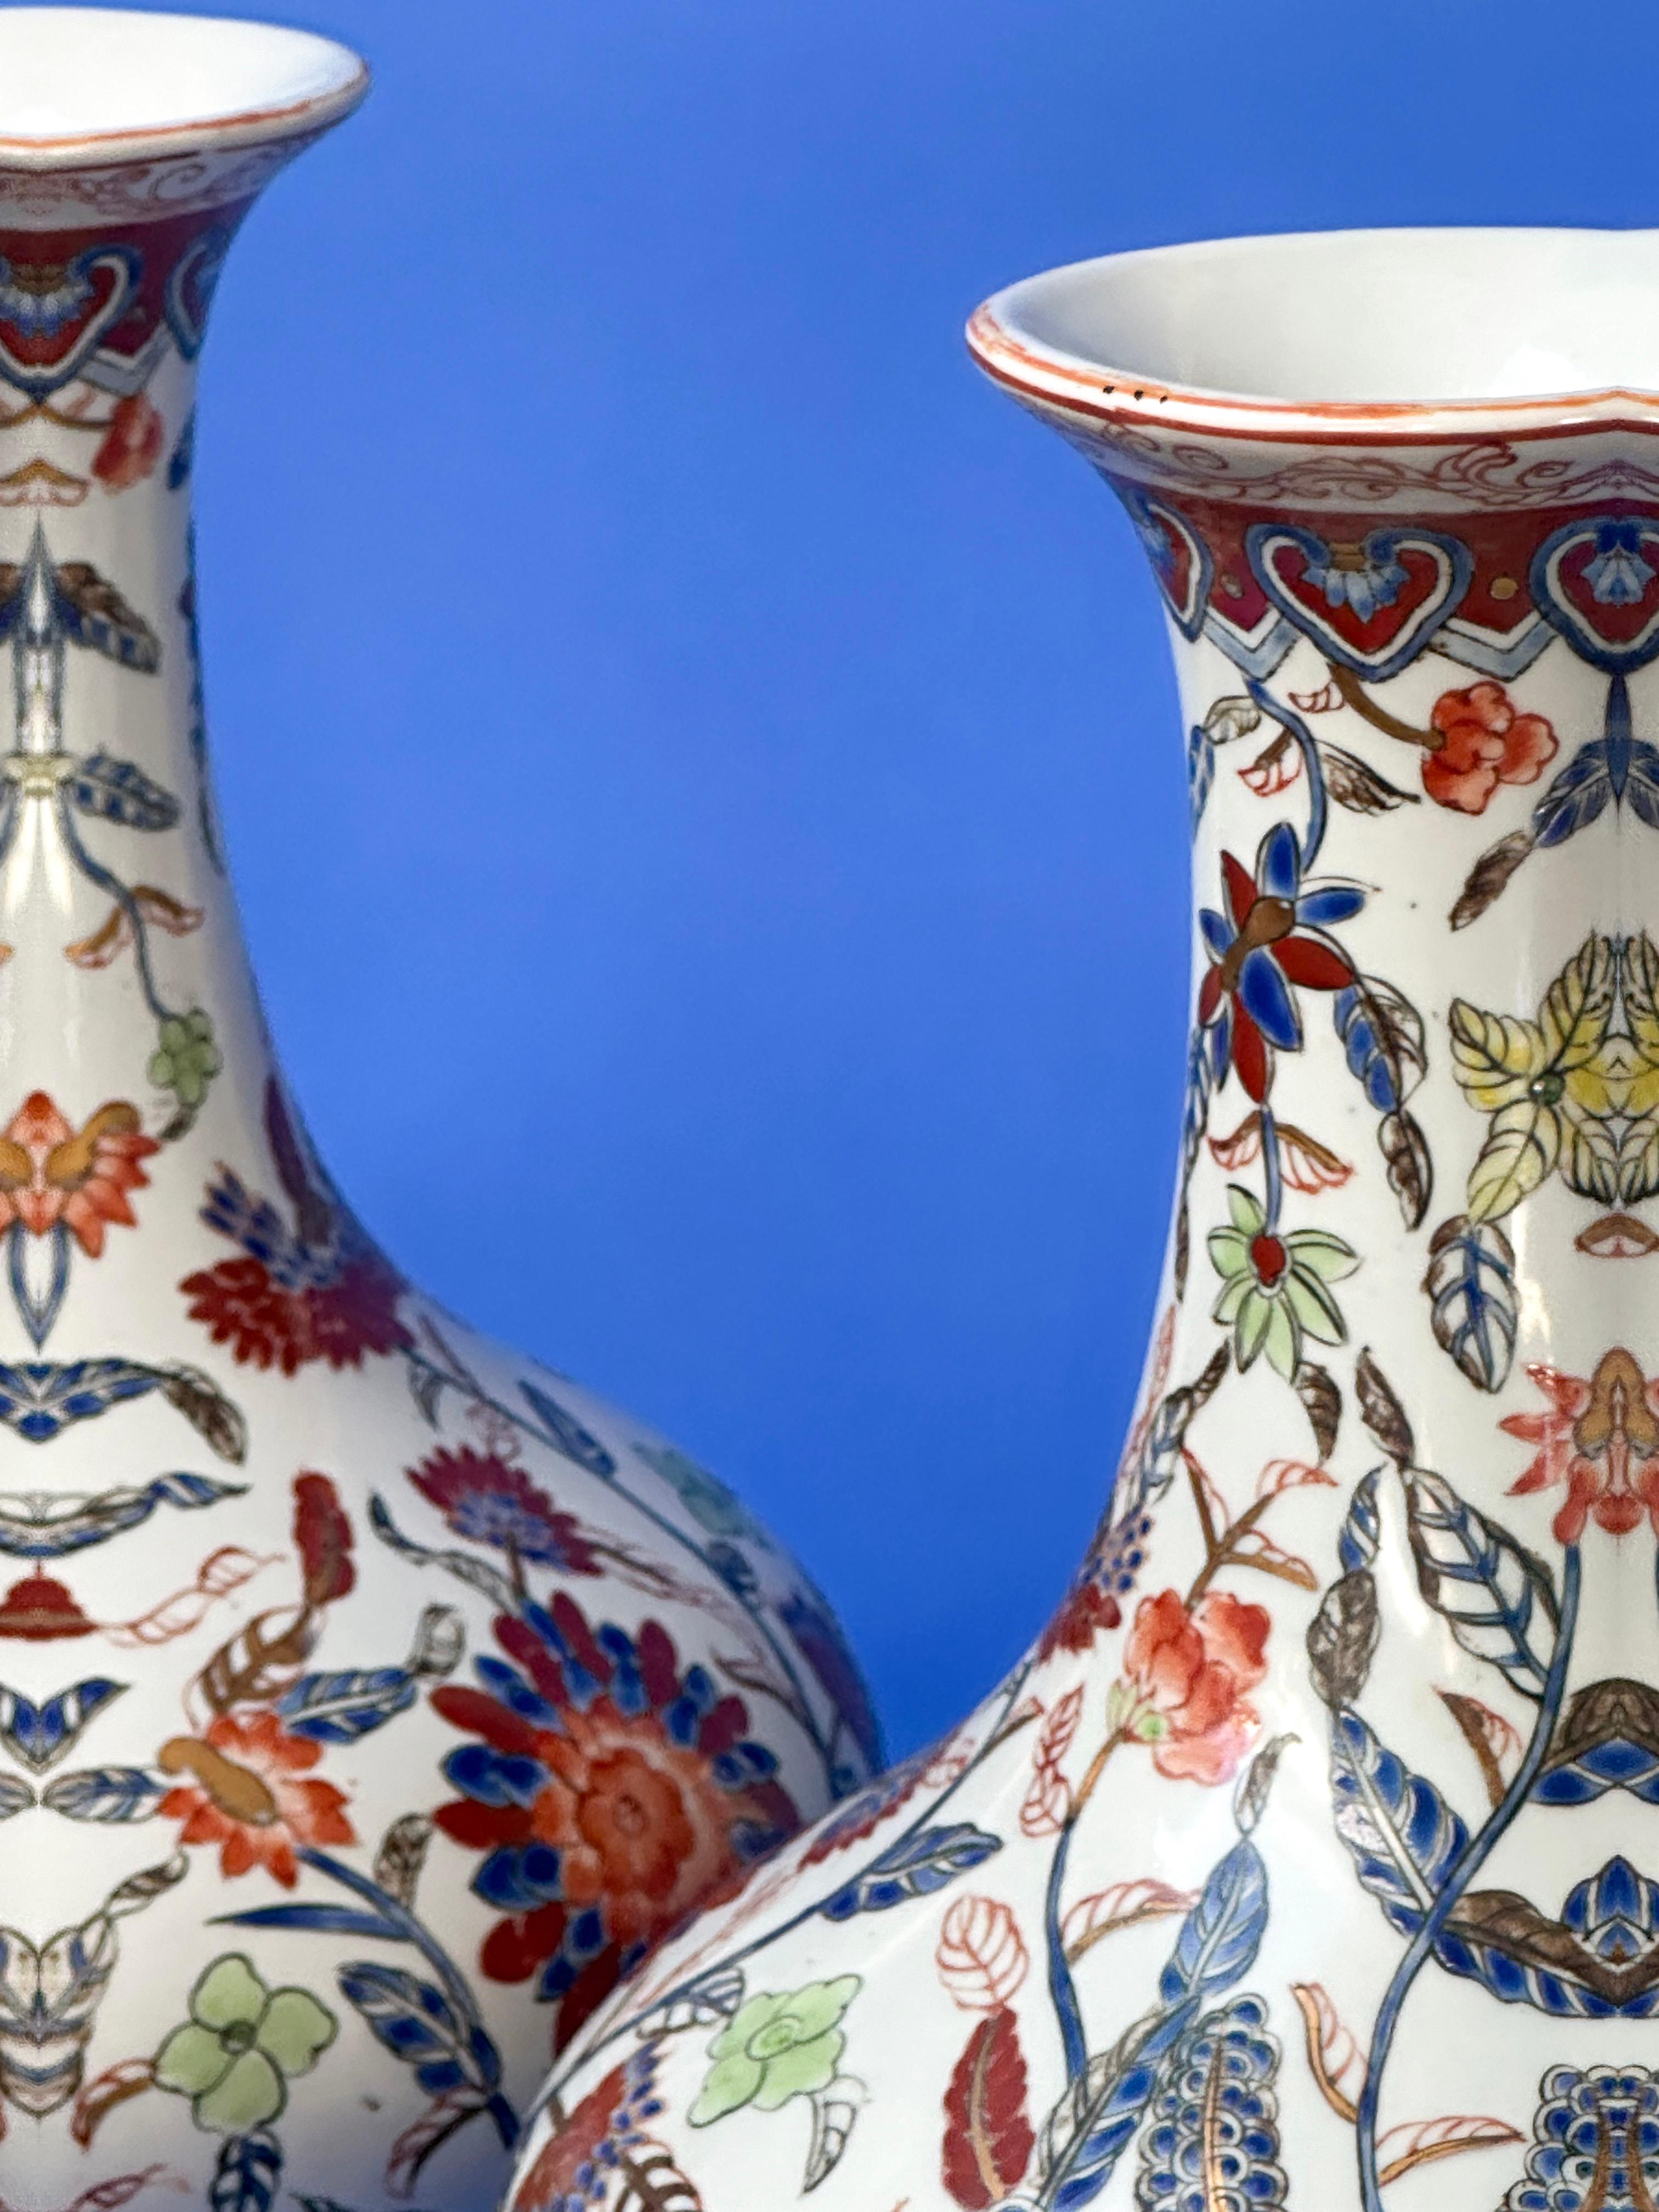 Late 20th Century Chinese Vintage Pear Shaped Porcelain Vases - Red and Blue Tongzhi/Qing Style